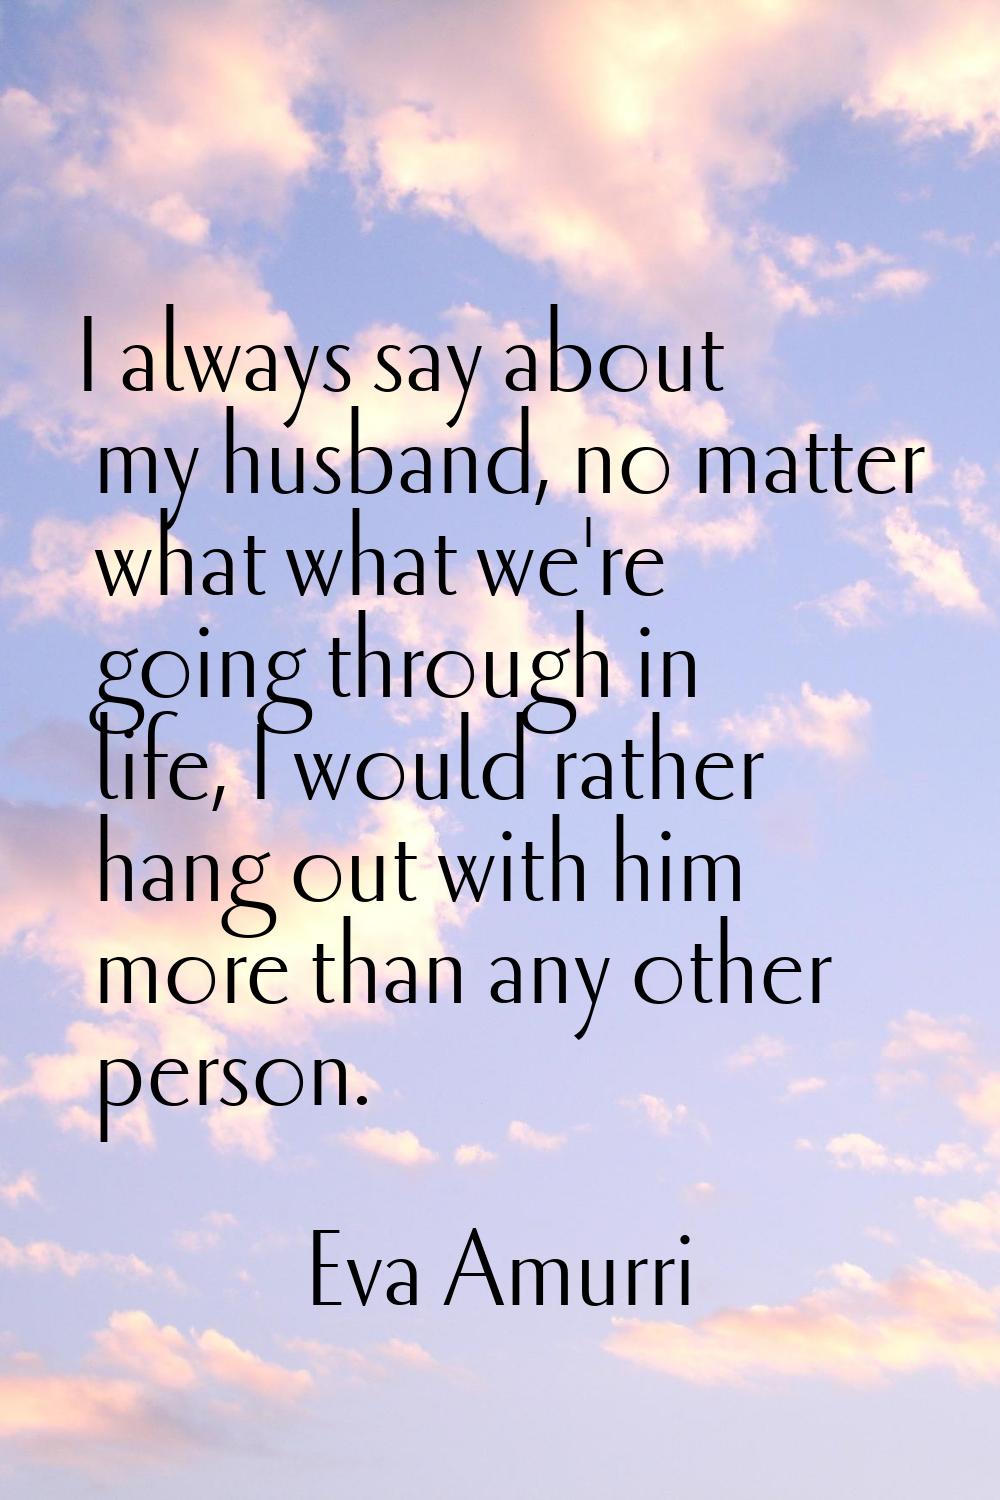 I always say about my husband, no matter what what we're going through in life, I would rather hang